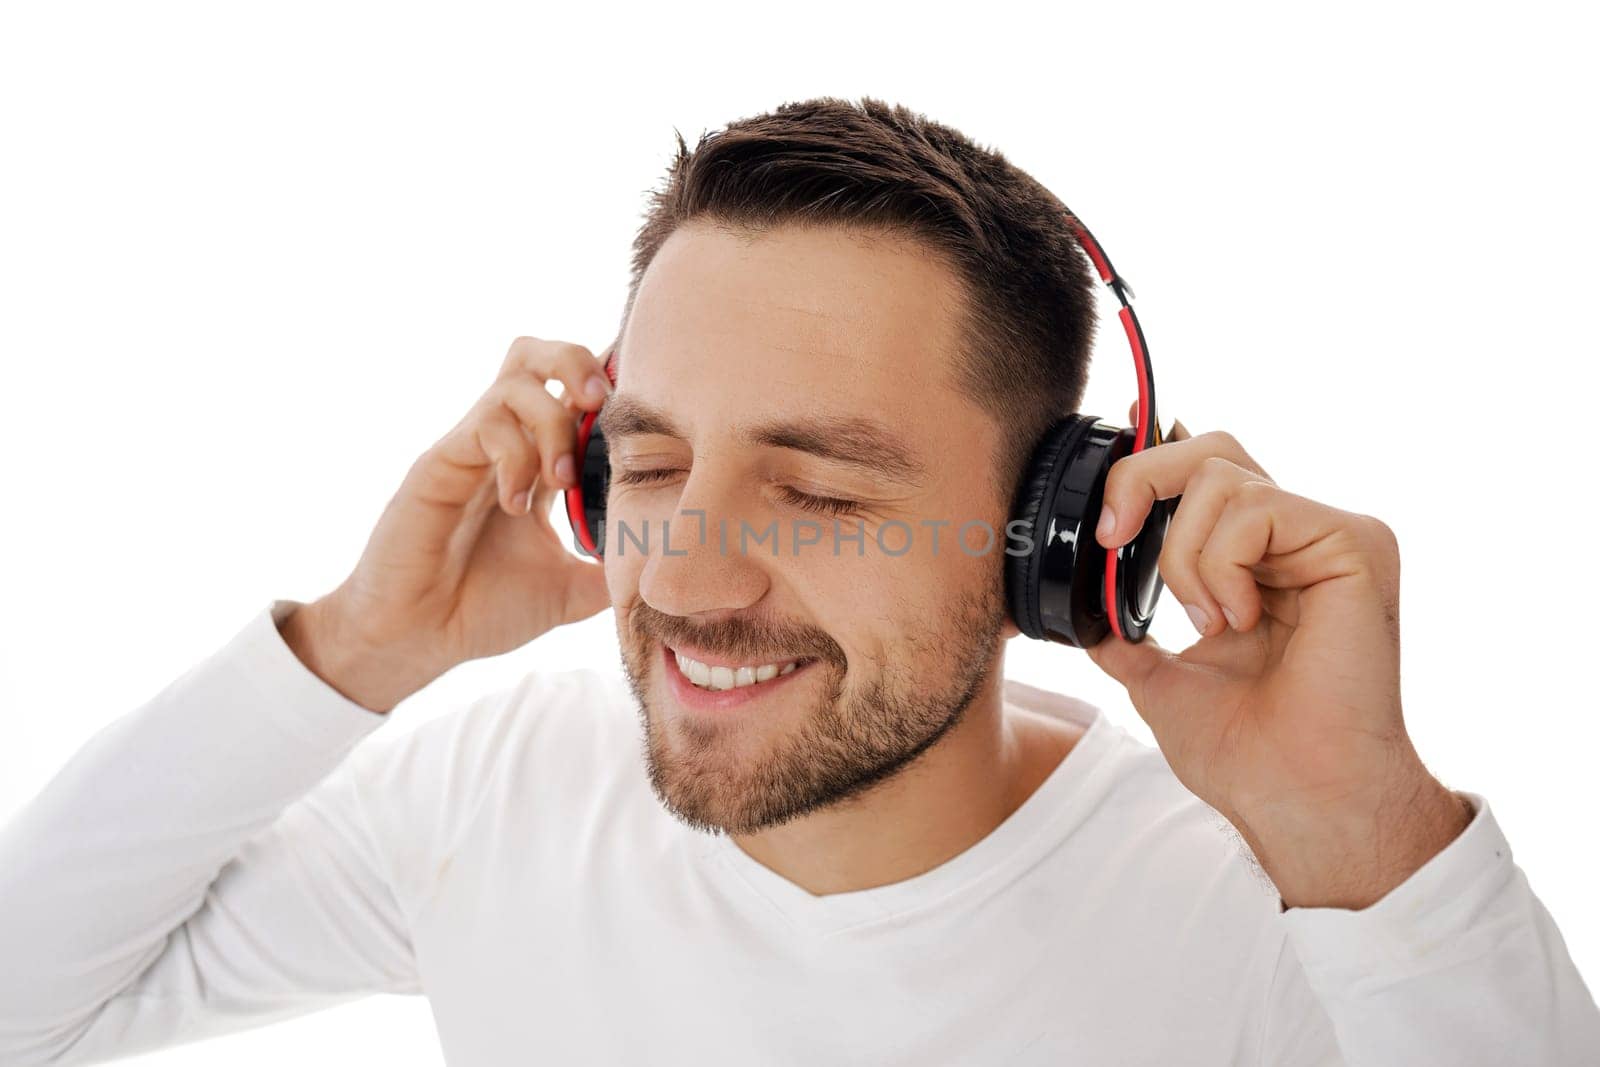 Close-up portrait of handsome young man in headphones listening to music and dancing isolated on white background.